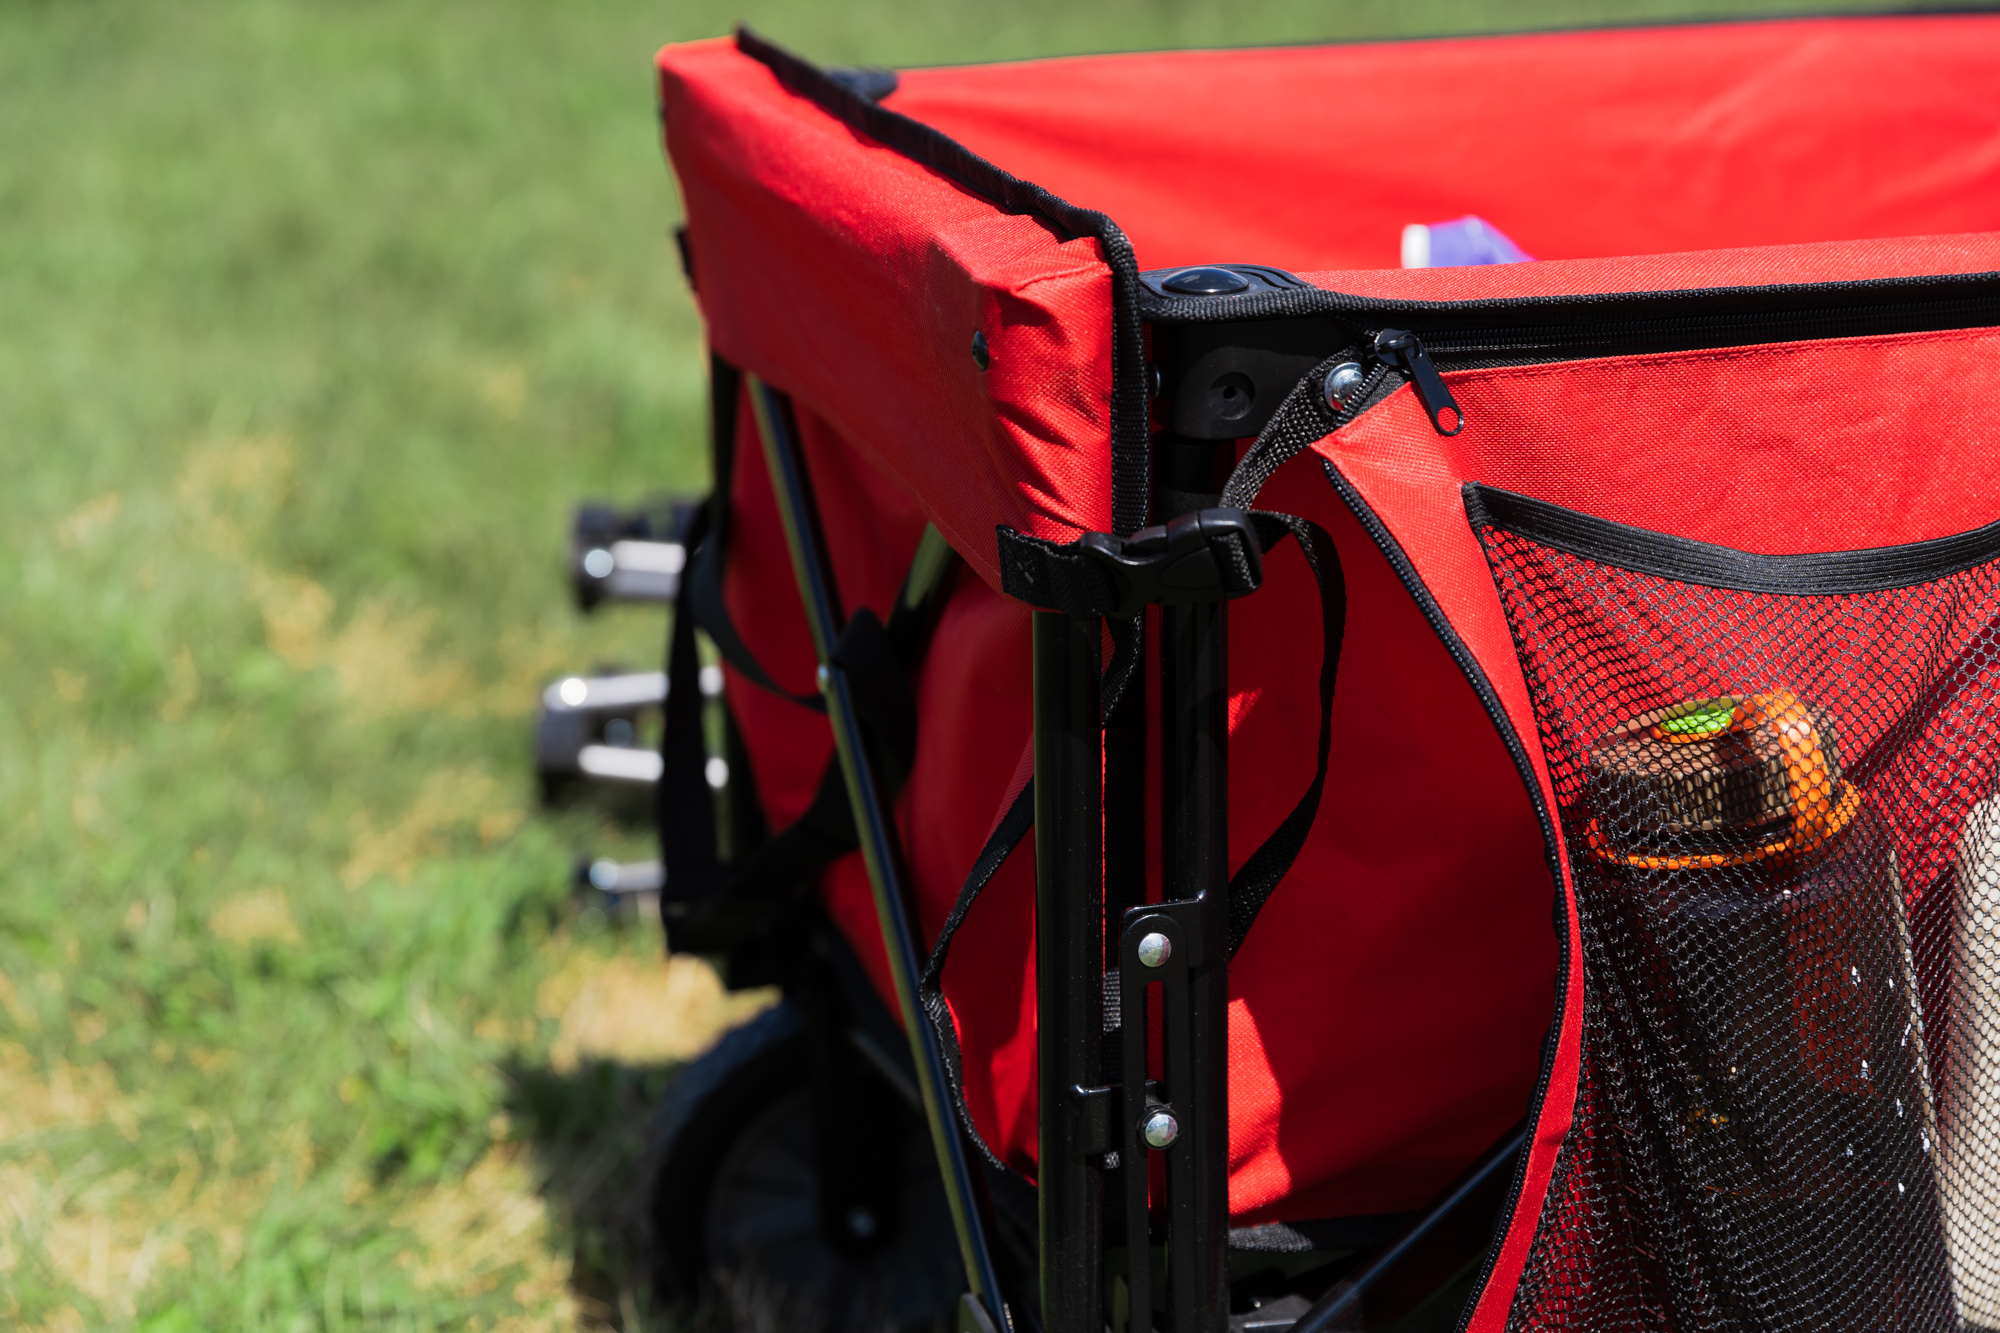 Ozark Trail Camping Utility Wagon with Tailgate & Extension Handle, Red - image 3 of 10